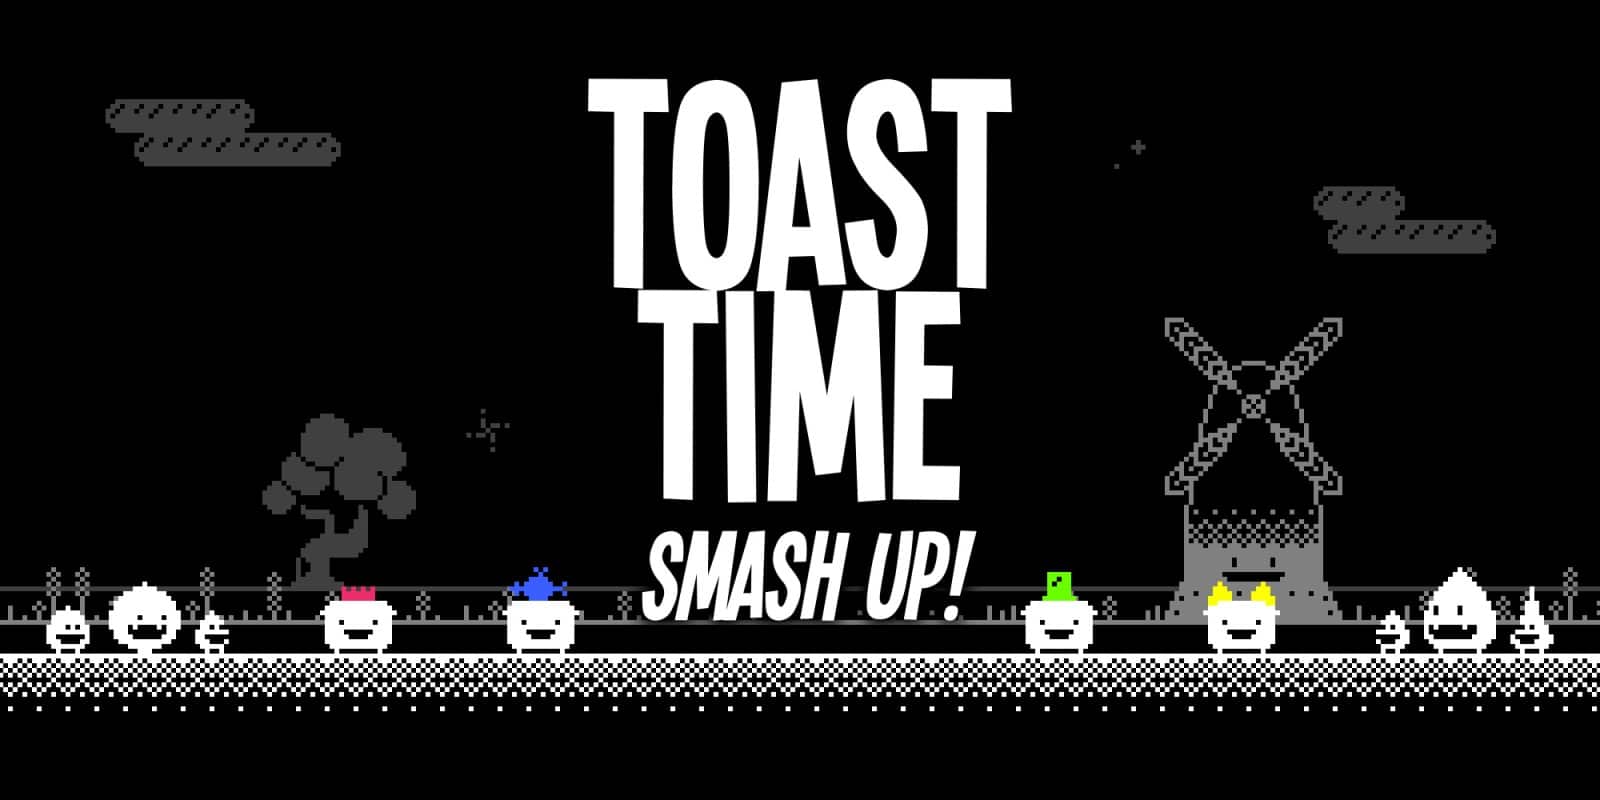 Toast Time: Smash Up! player count stats